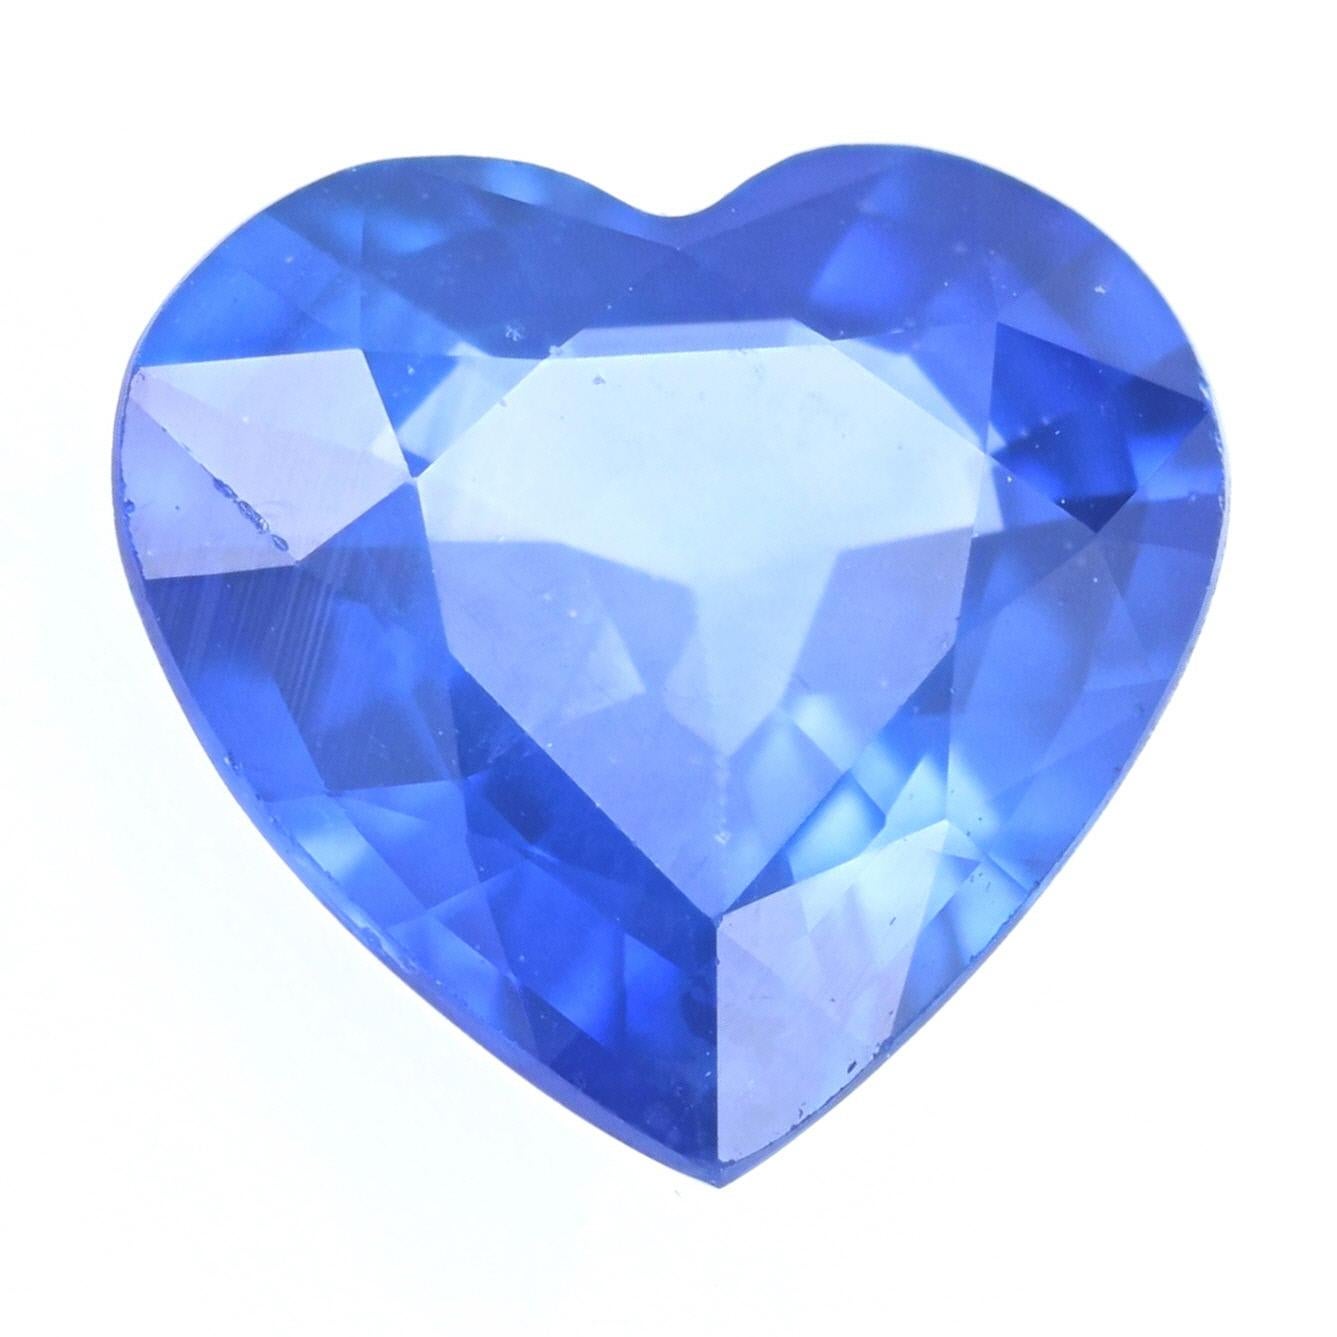 Weight: 1.65ct
Treatment: Heating
Cut: Heart 
Color: Blue  
Dimensions (mm): 7.67 x 8.03 x 3.68 

Condition: New  

Please check out the enlarged pictures.

Thank you for taking the time to read our description. If you have any questions, please do